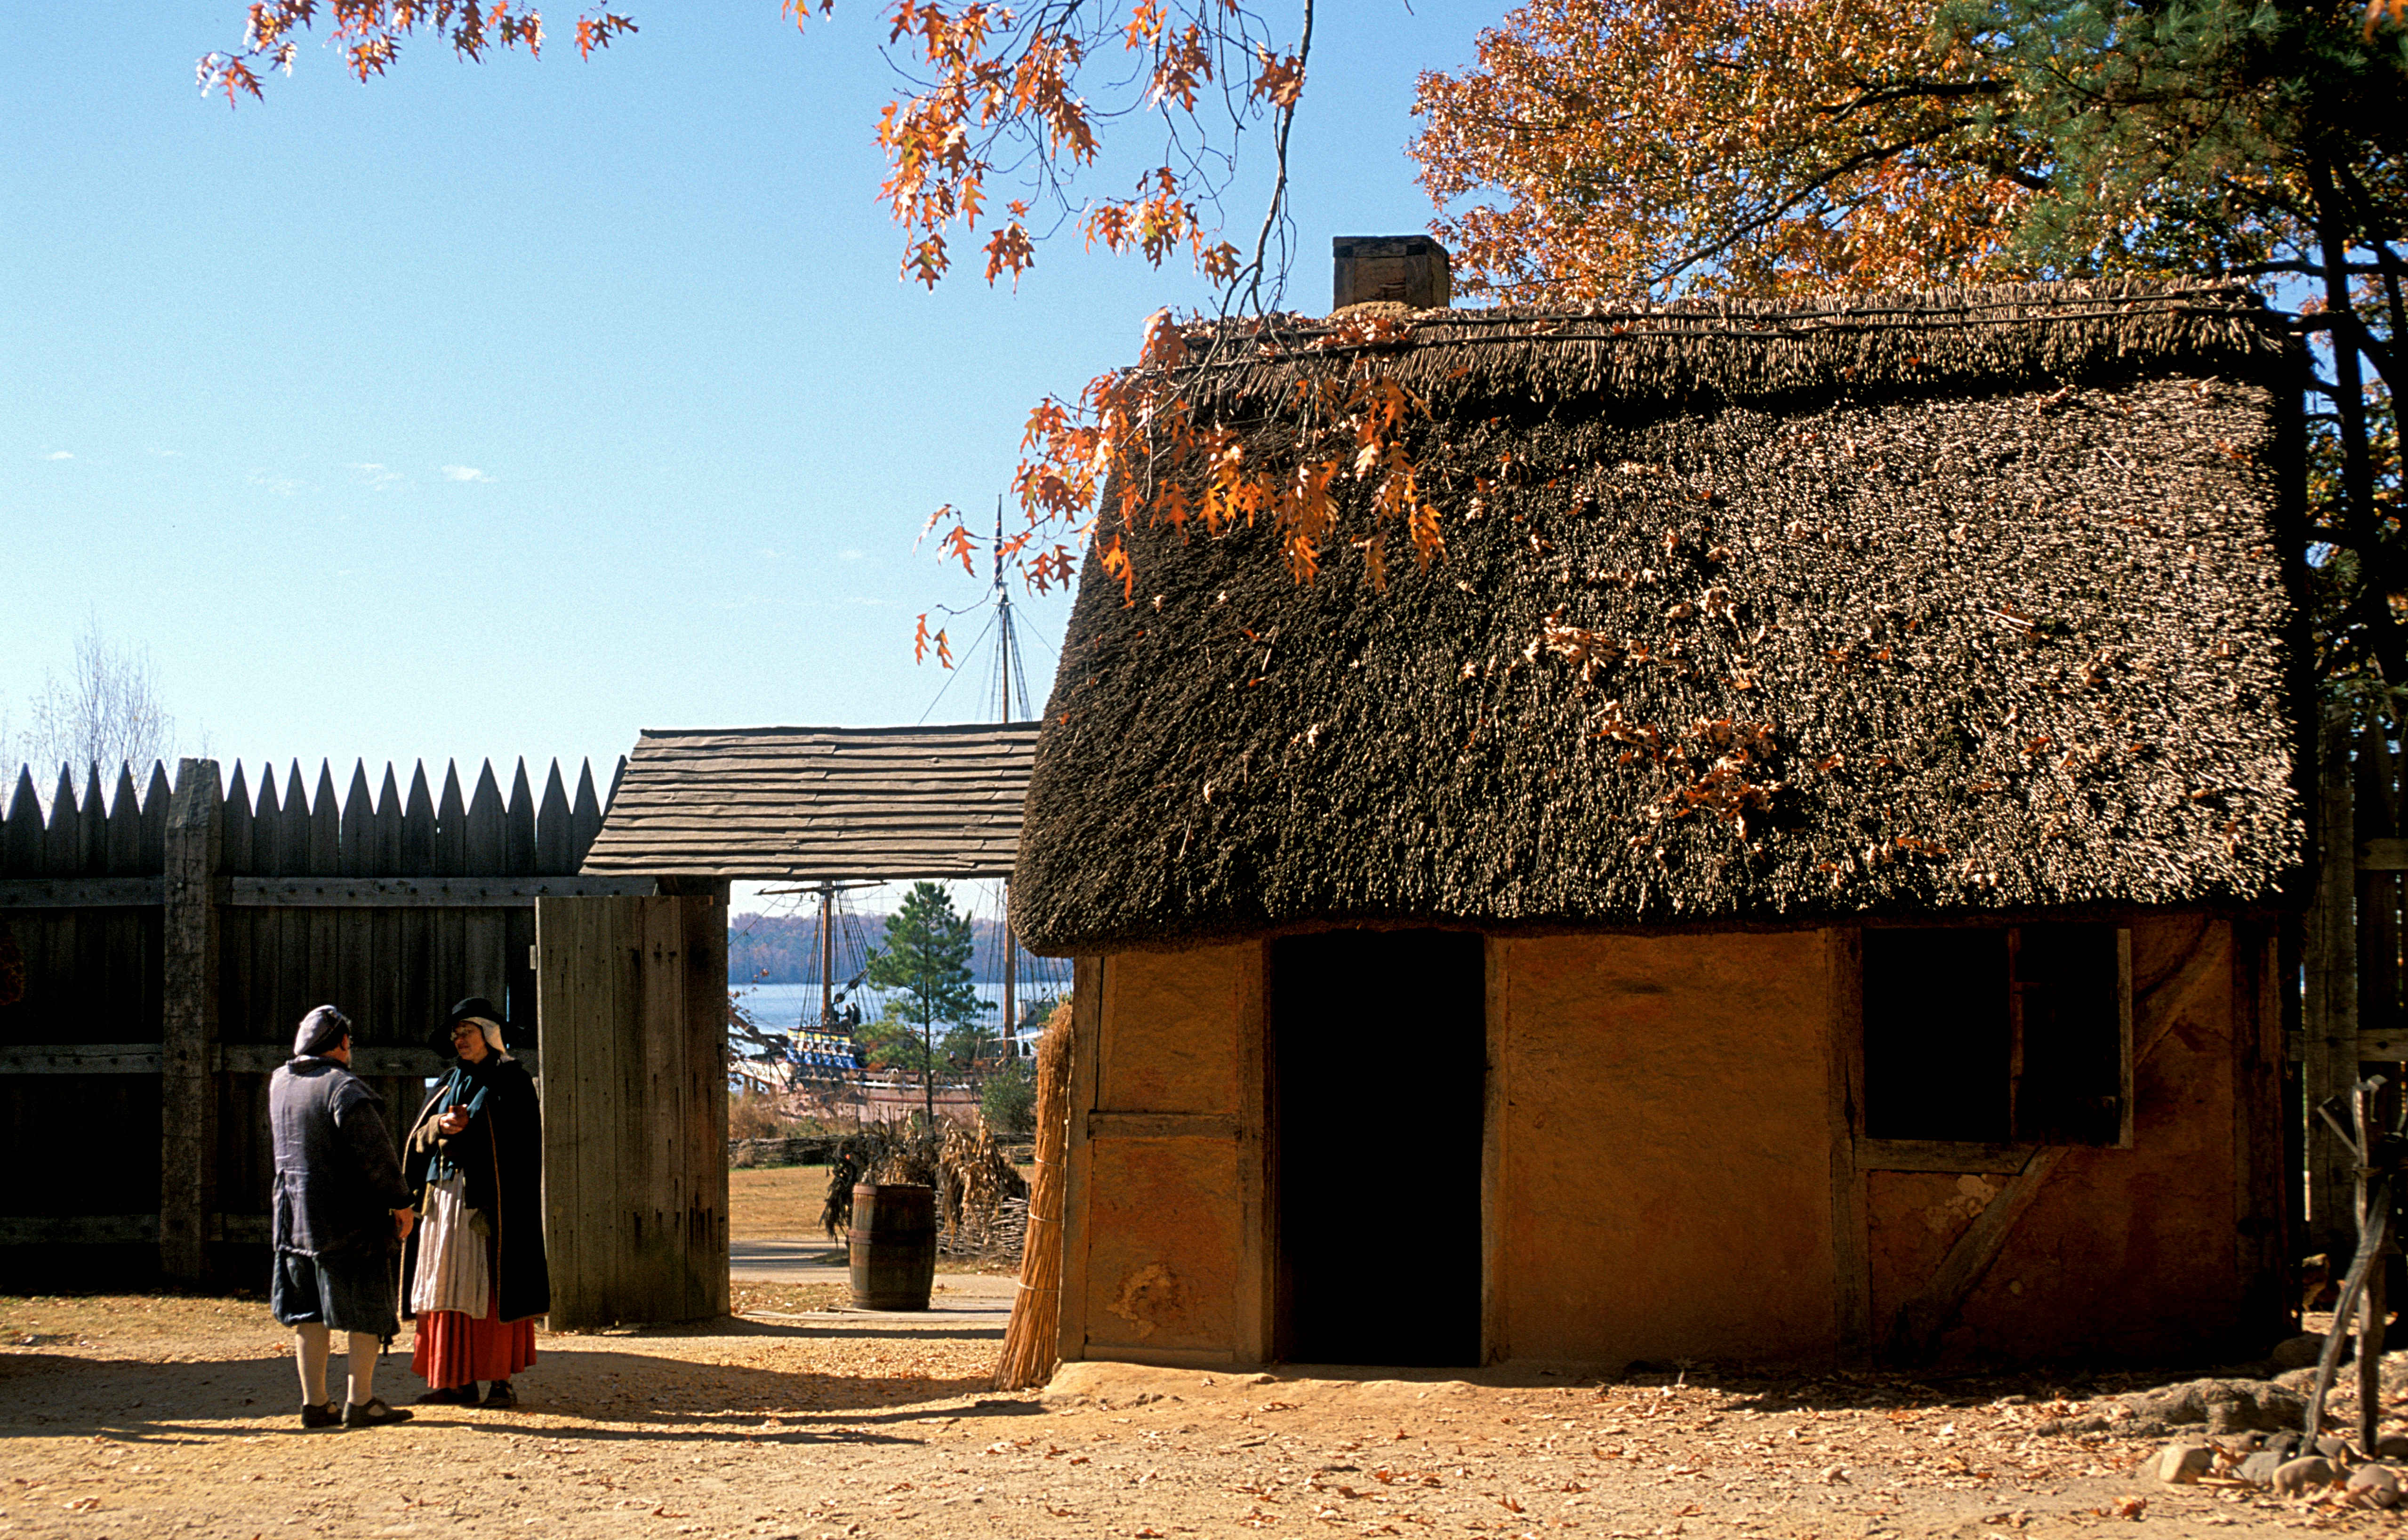 Costumed guides help bring 17th-century Jamestown to life. Image by Marilyn Angel Wynn / Getty Images